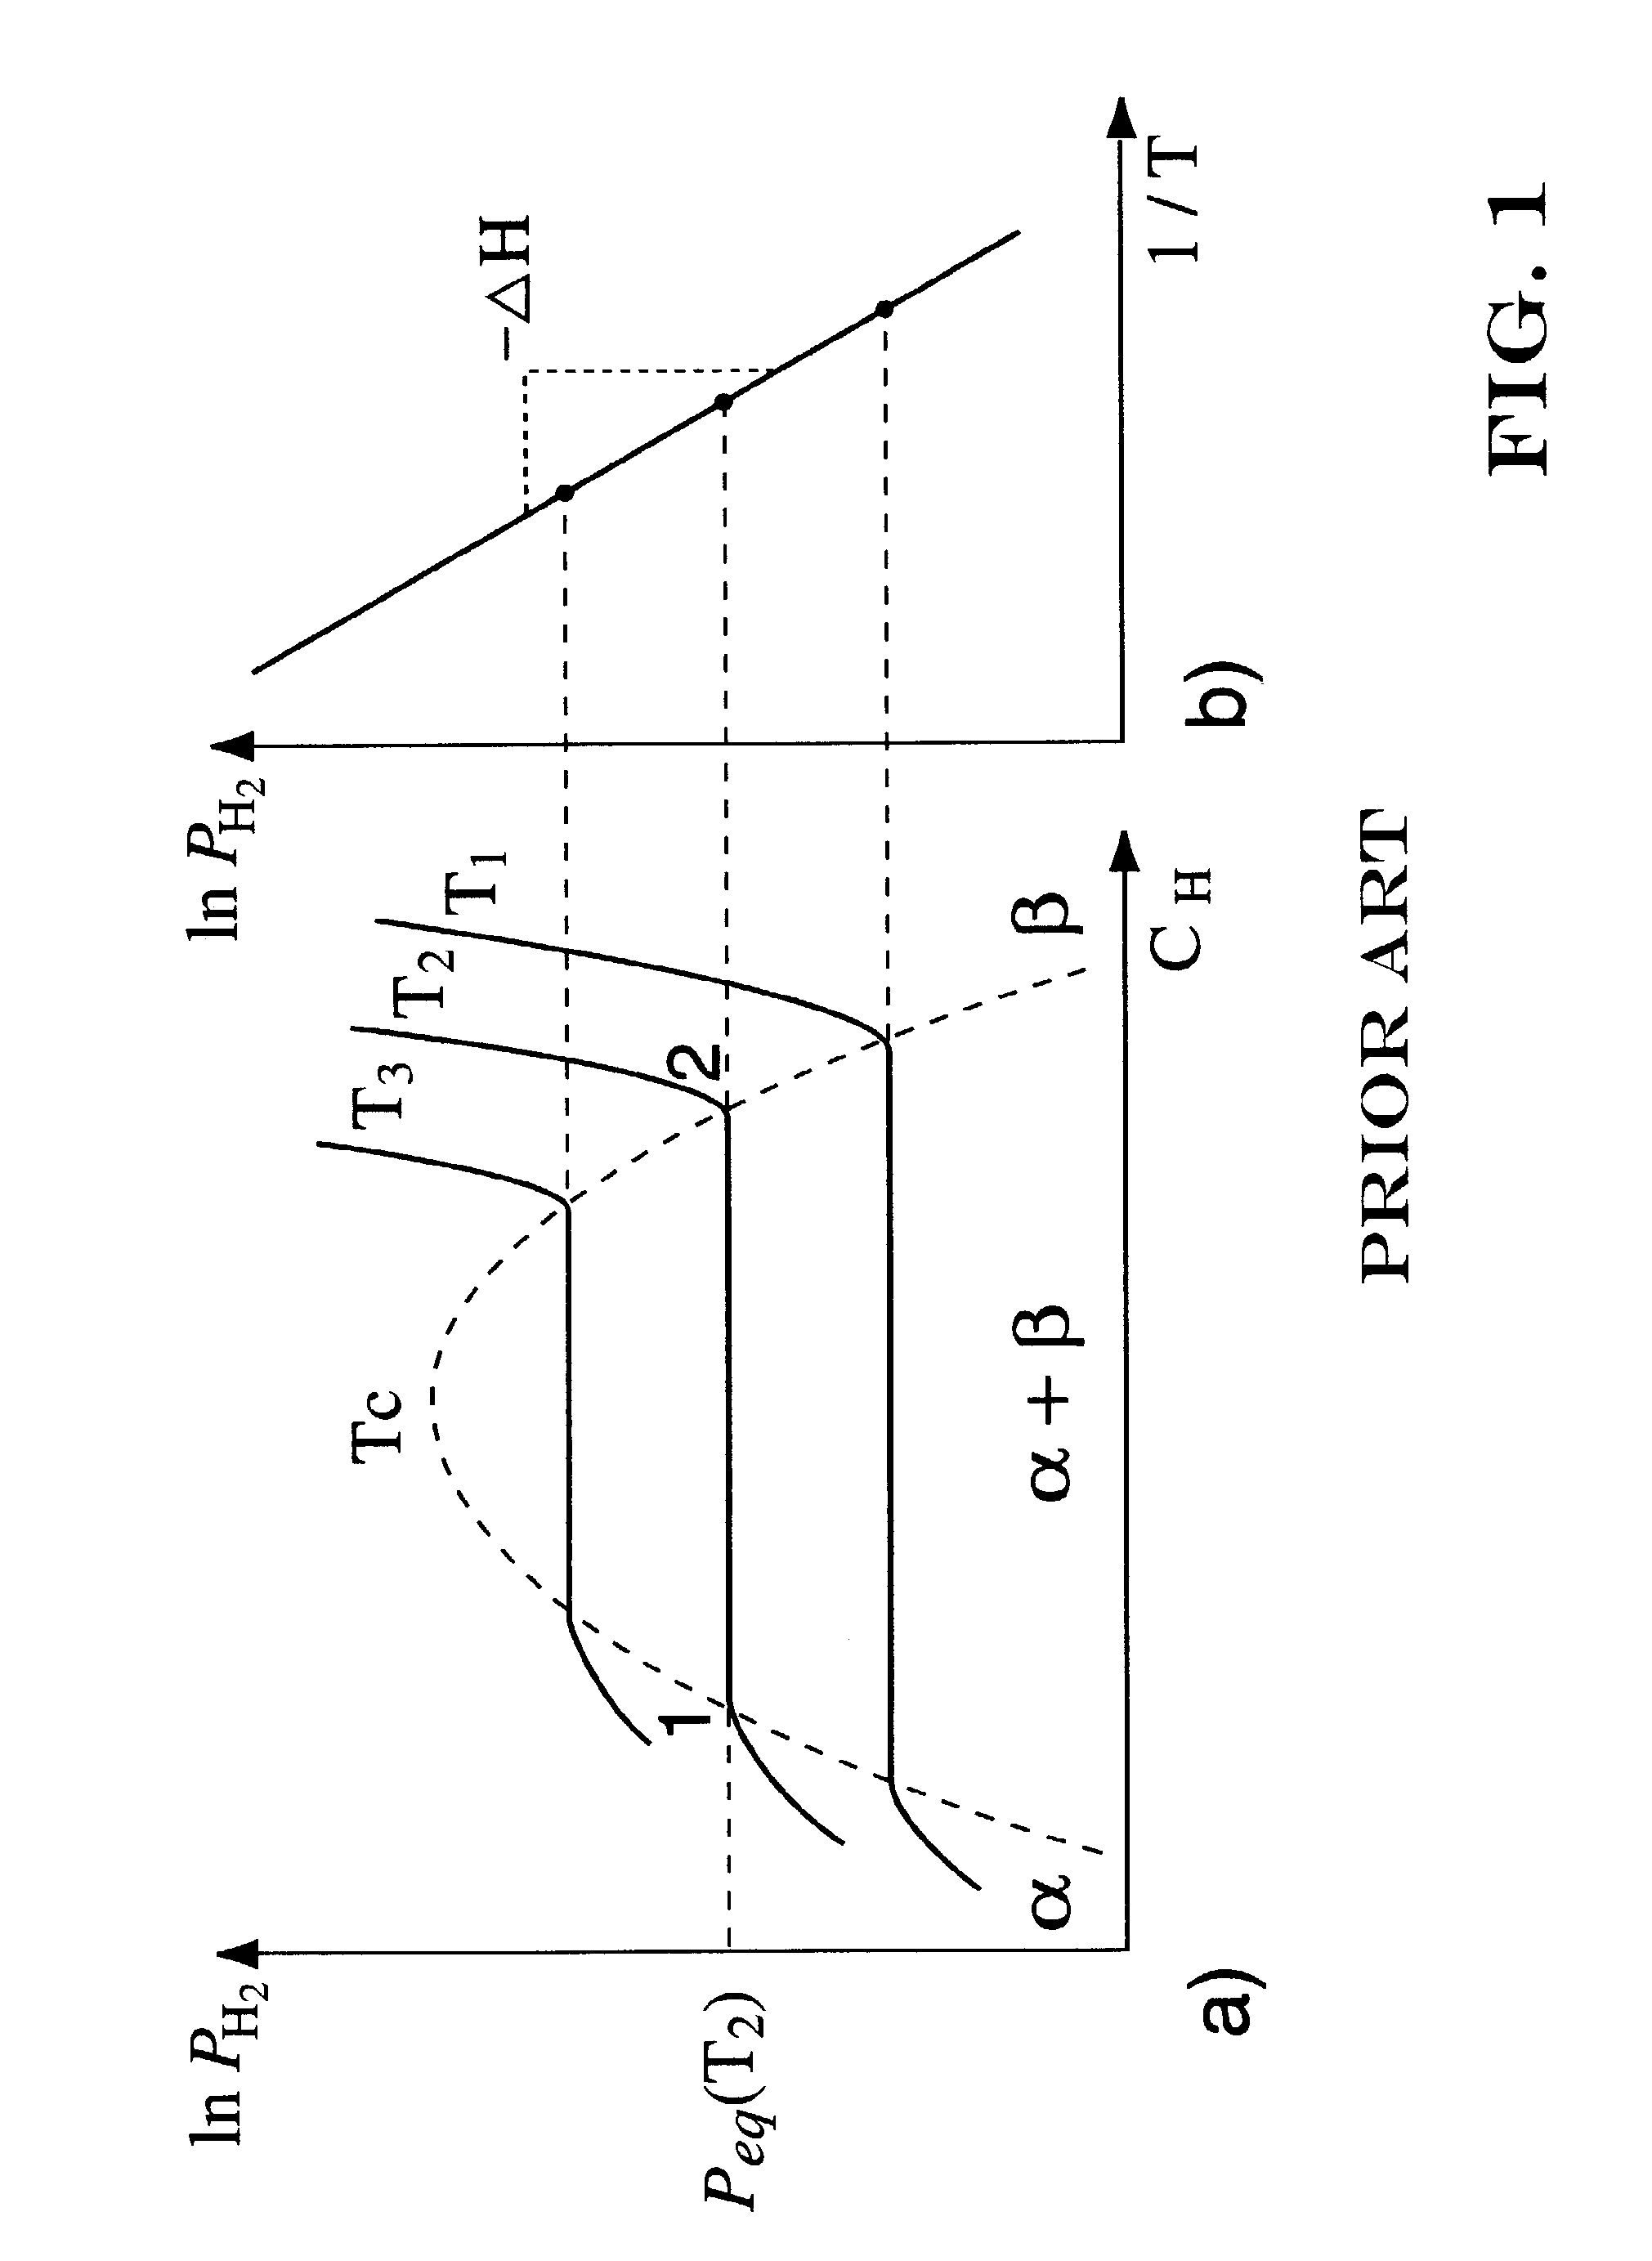 Method and apparatus for measuring gas sorption and desorption properties of materials